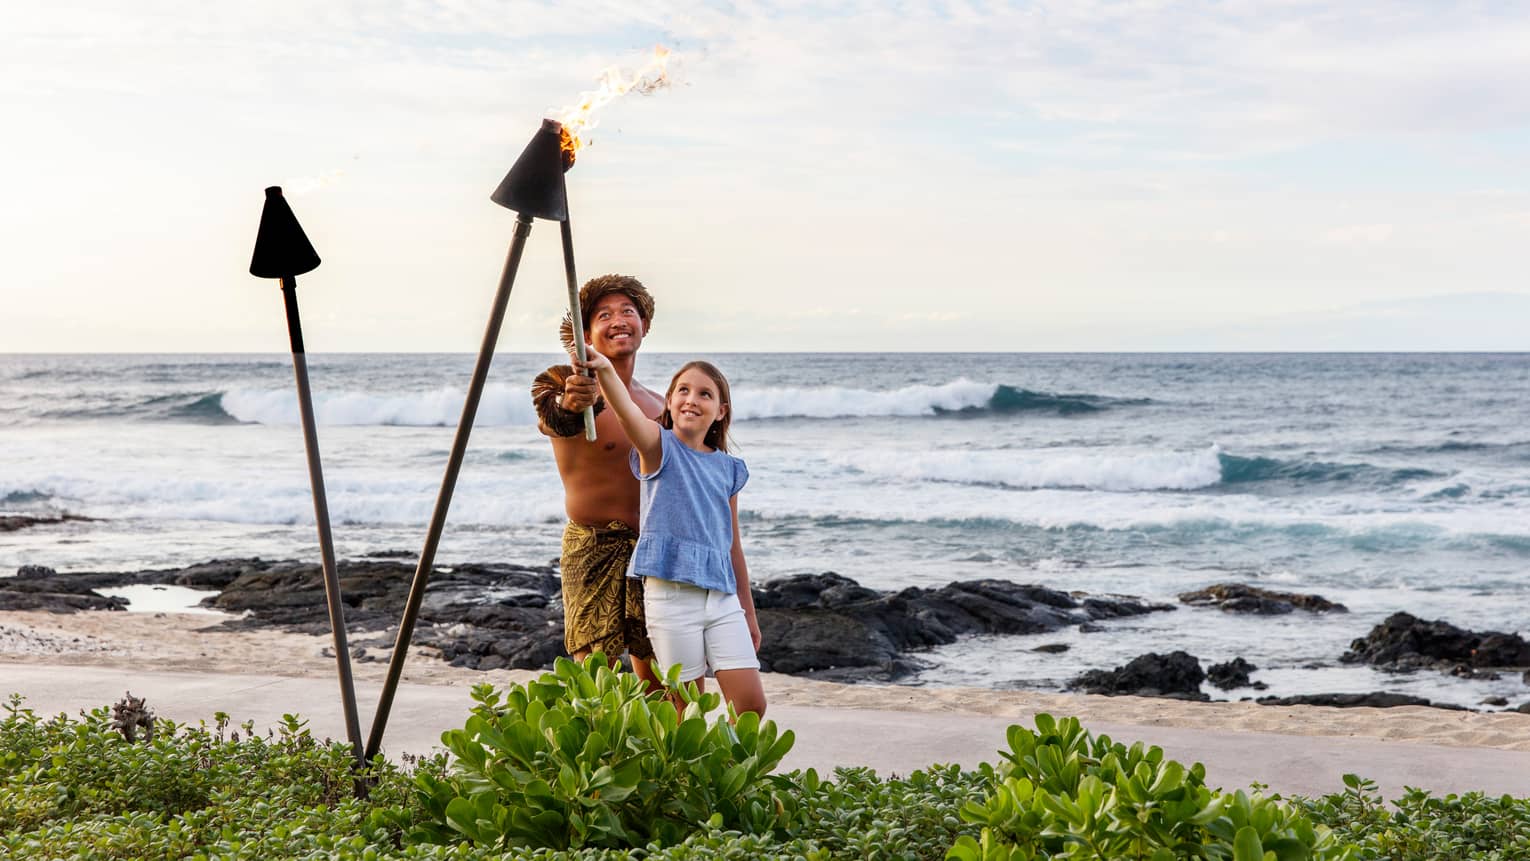 A father and daughter lighting lanterns along a beach shore together.